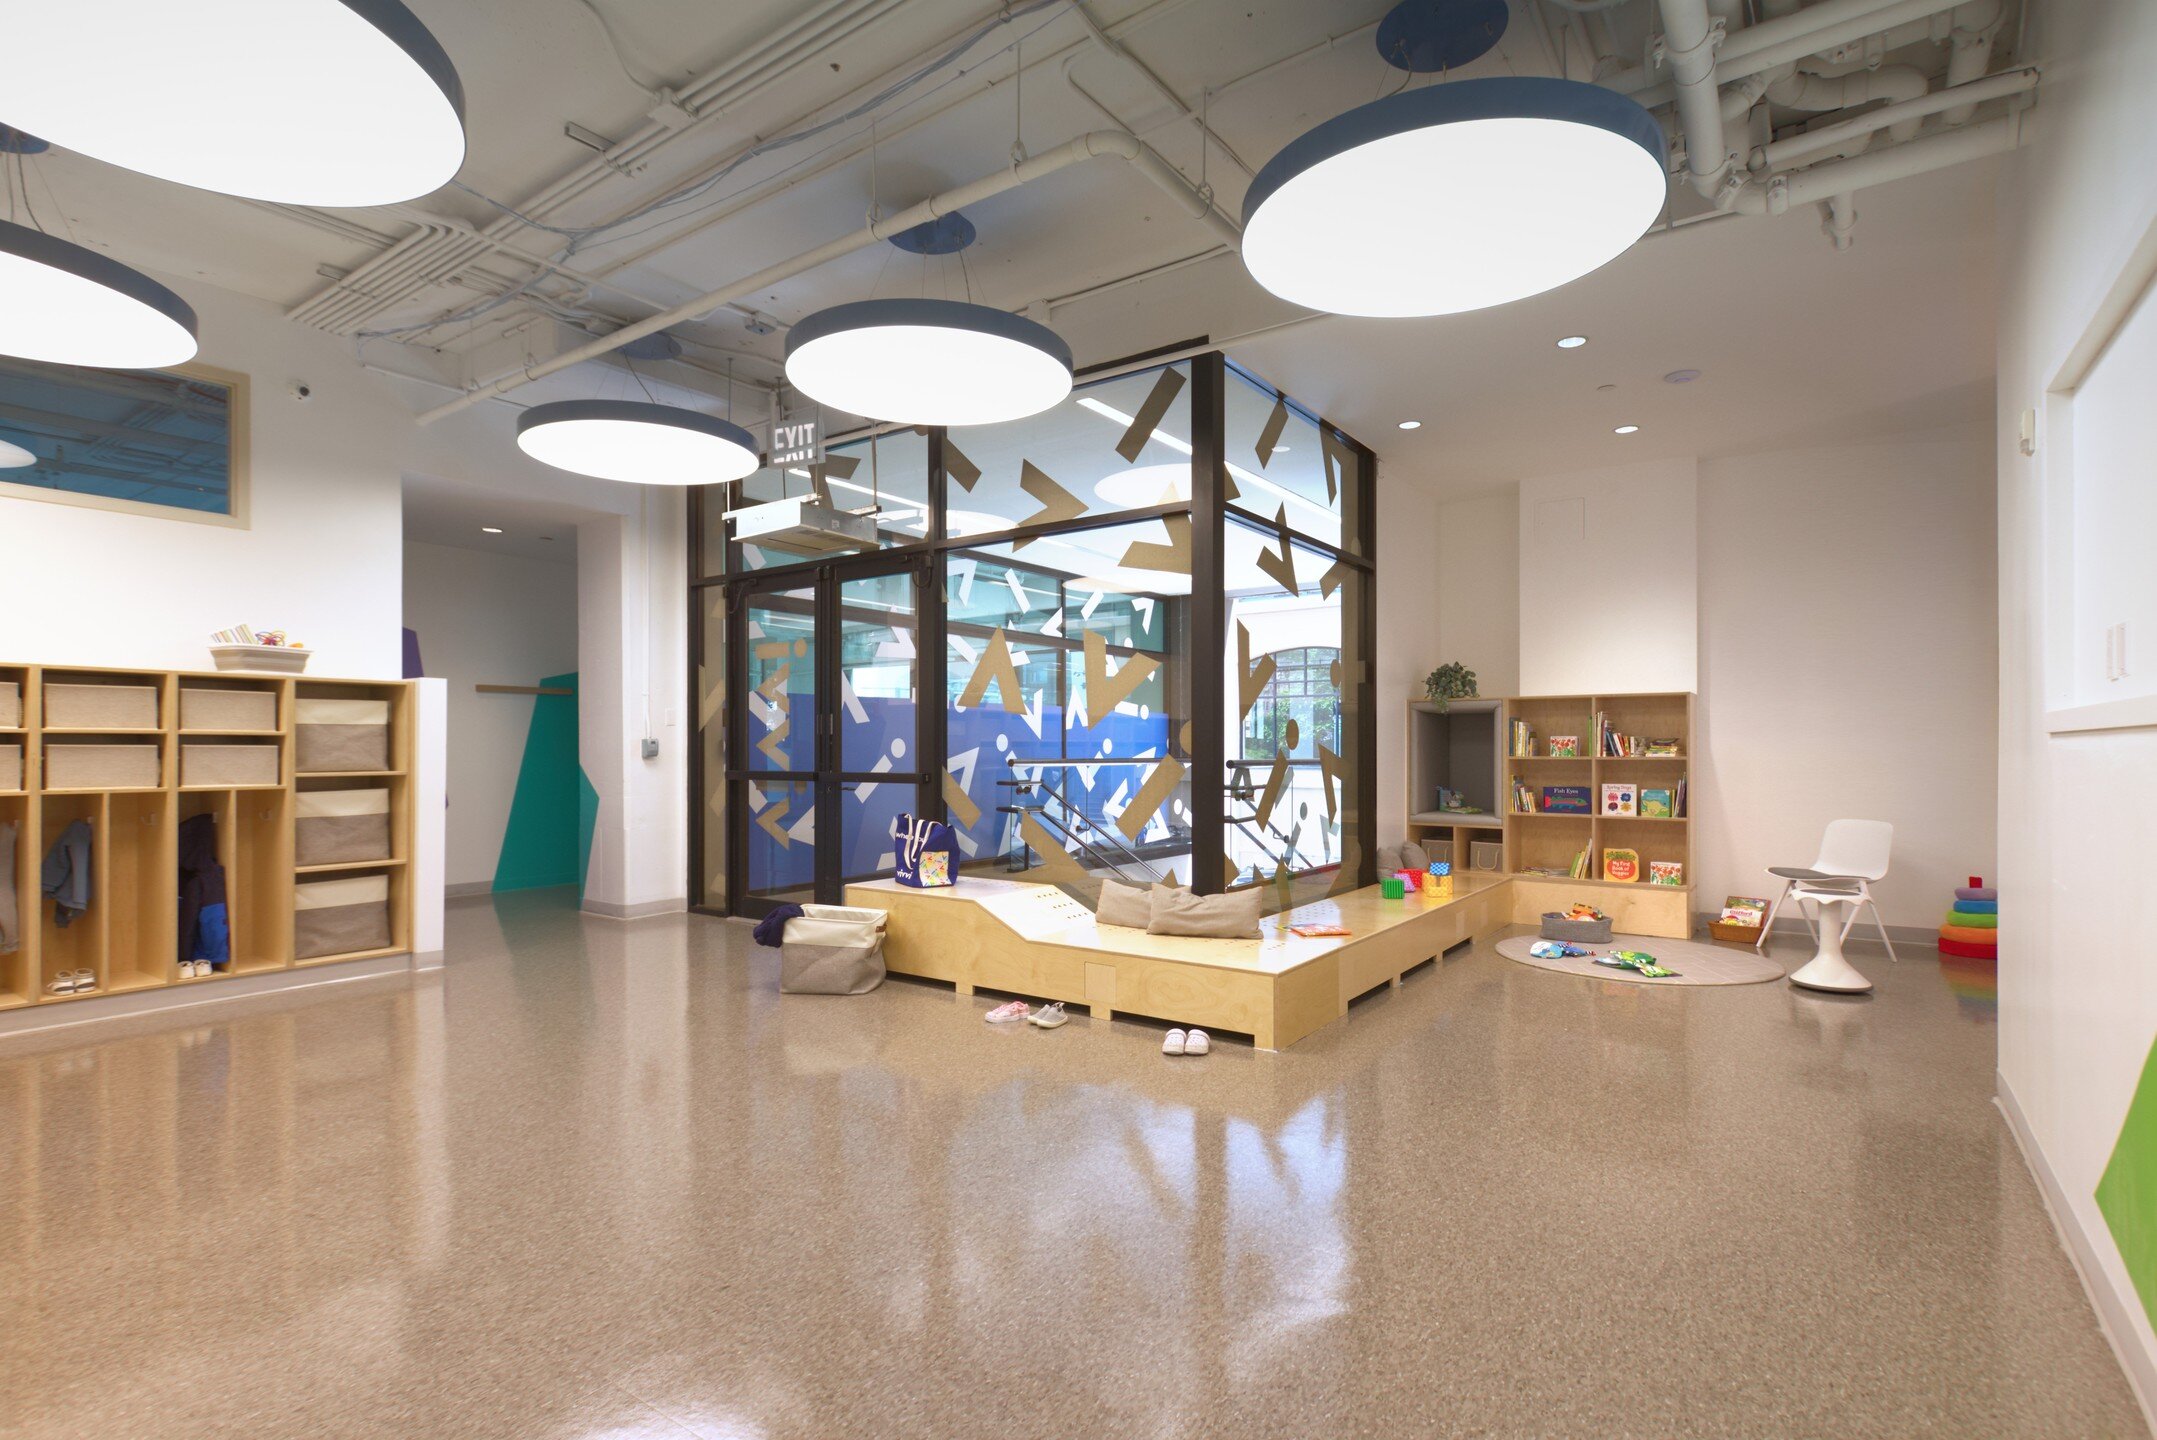 Special Spaces at School. This lobby is brought to life by our design for a bench, radiator cover, and shelves to create a mini-library space within the entry area. Custom &ldquo;confetti&rdquo; window film and colorful accents invite the children to